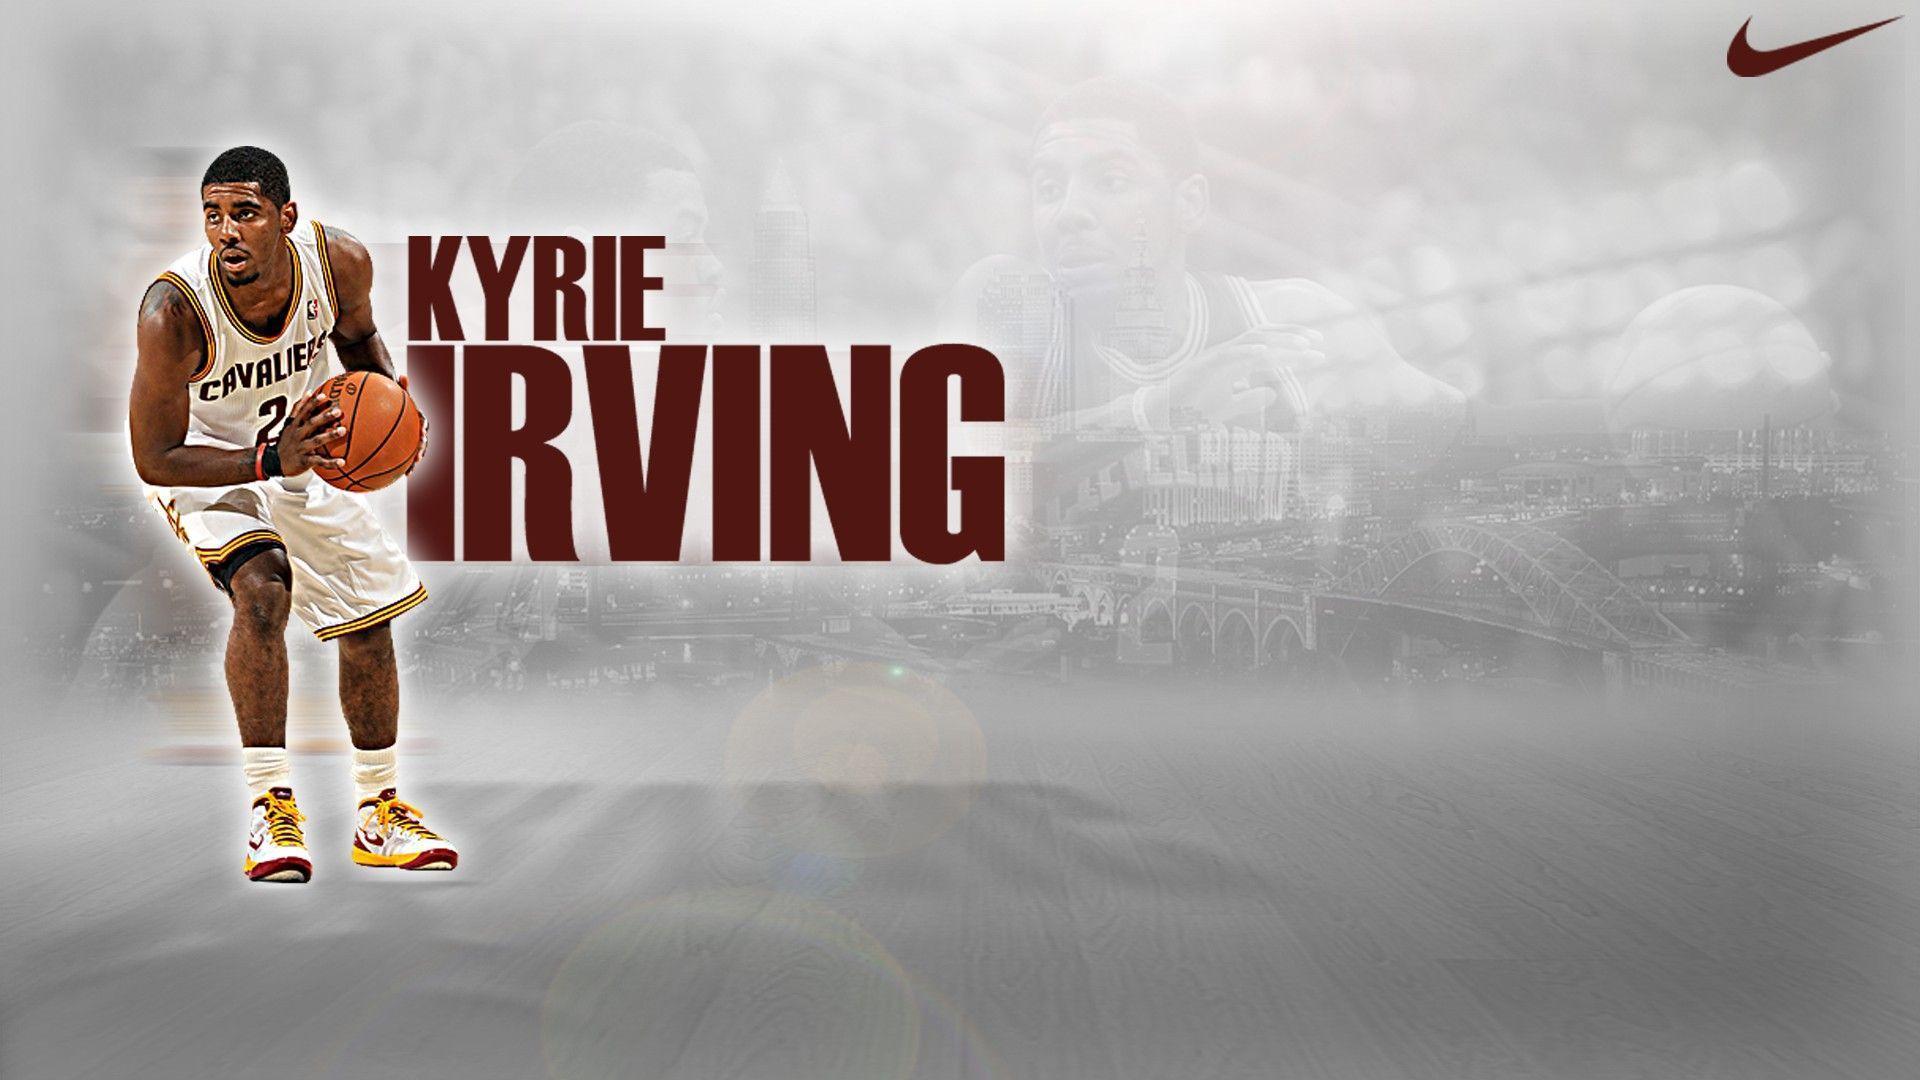 Kyrie Irving 2013 HD Wallpaper of Sports